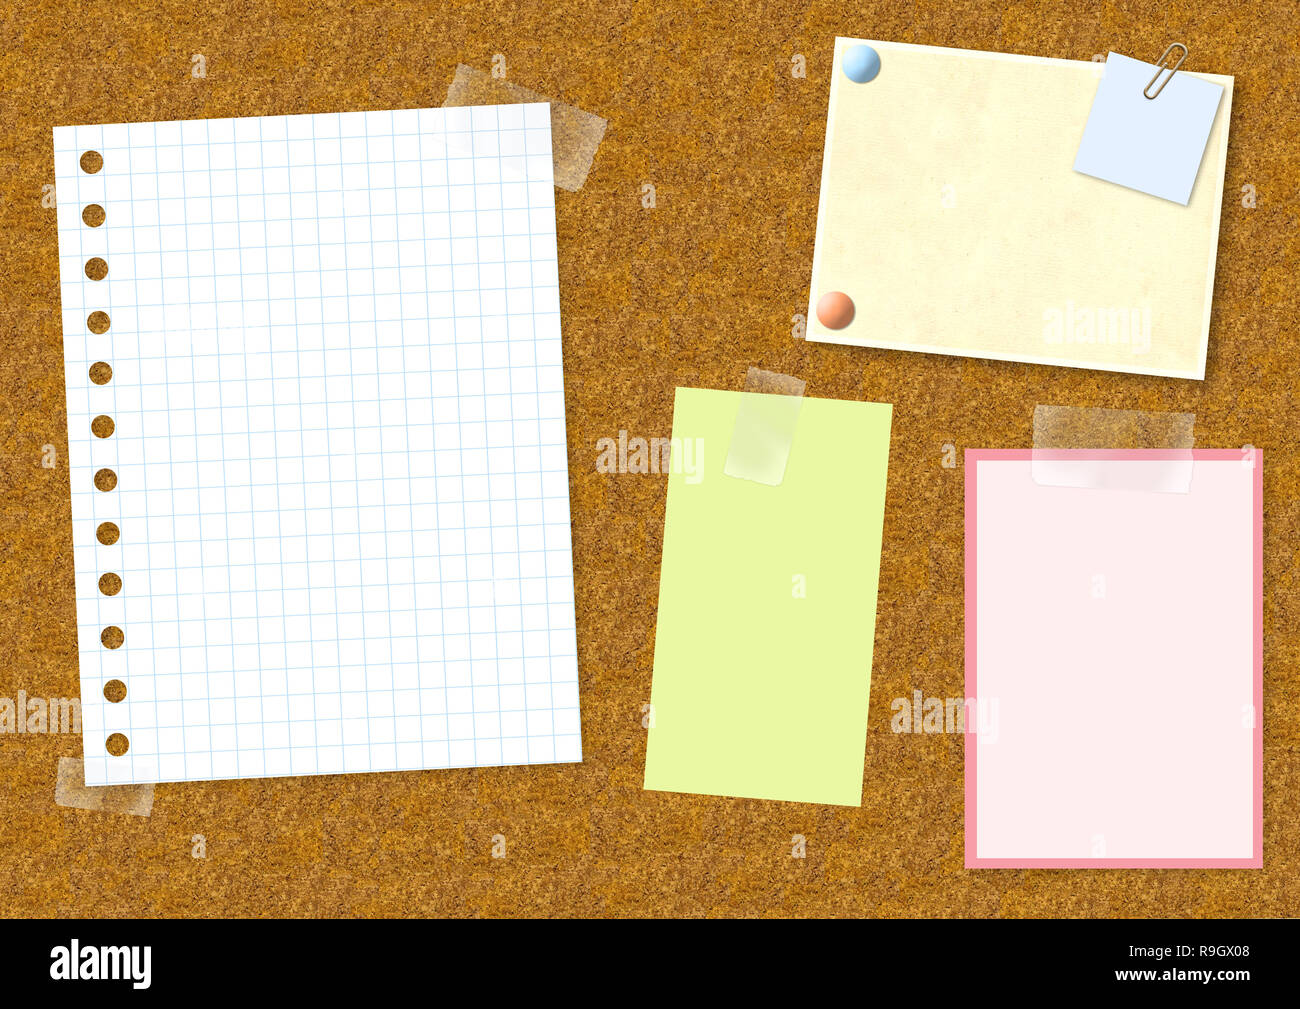 Decorative background with notice board Stock Photo - Alamy